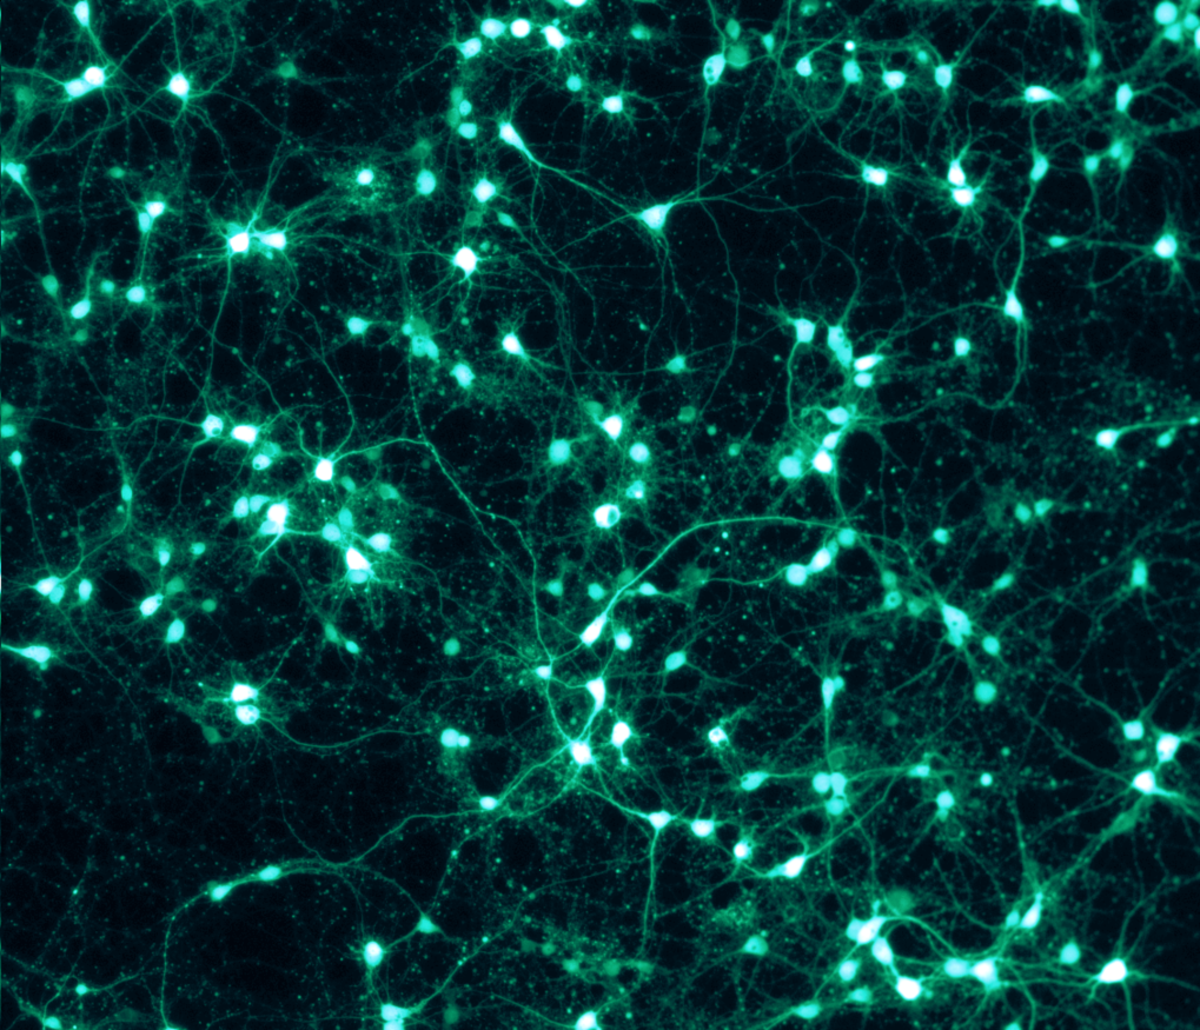 What Is the Structure and Layout of Neurons in the Brain?